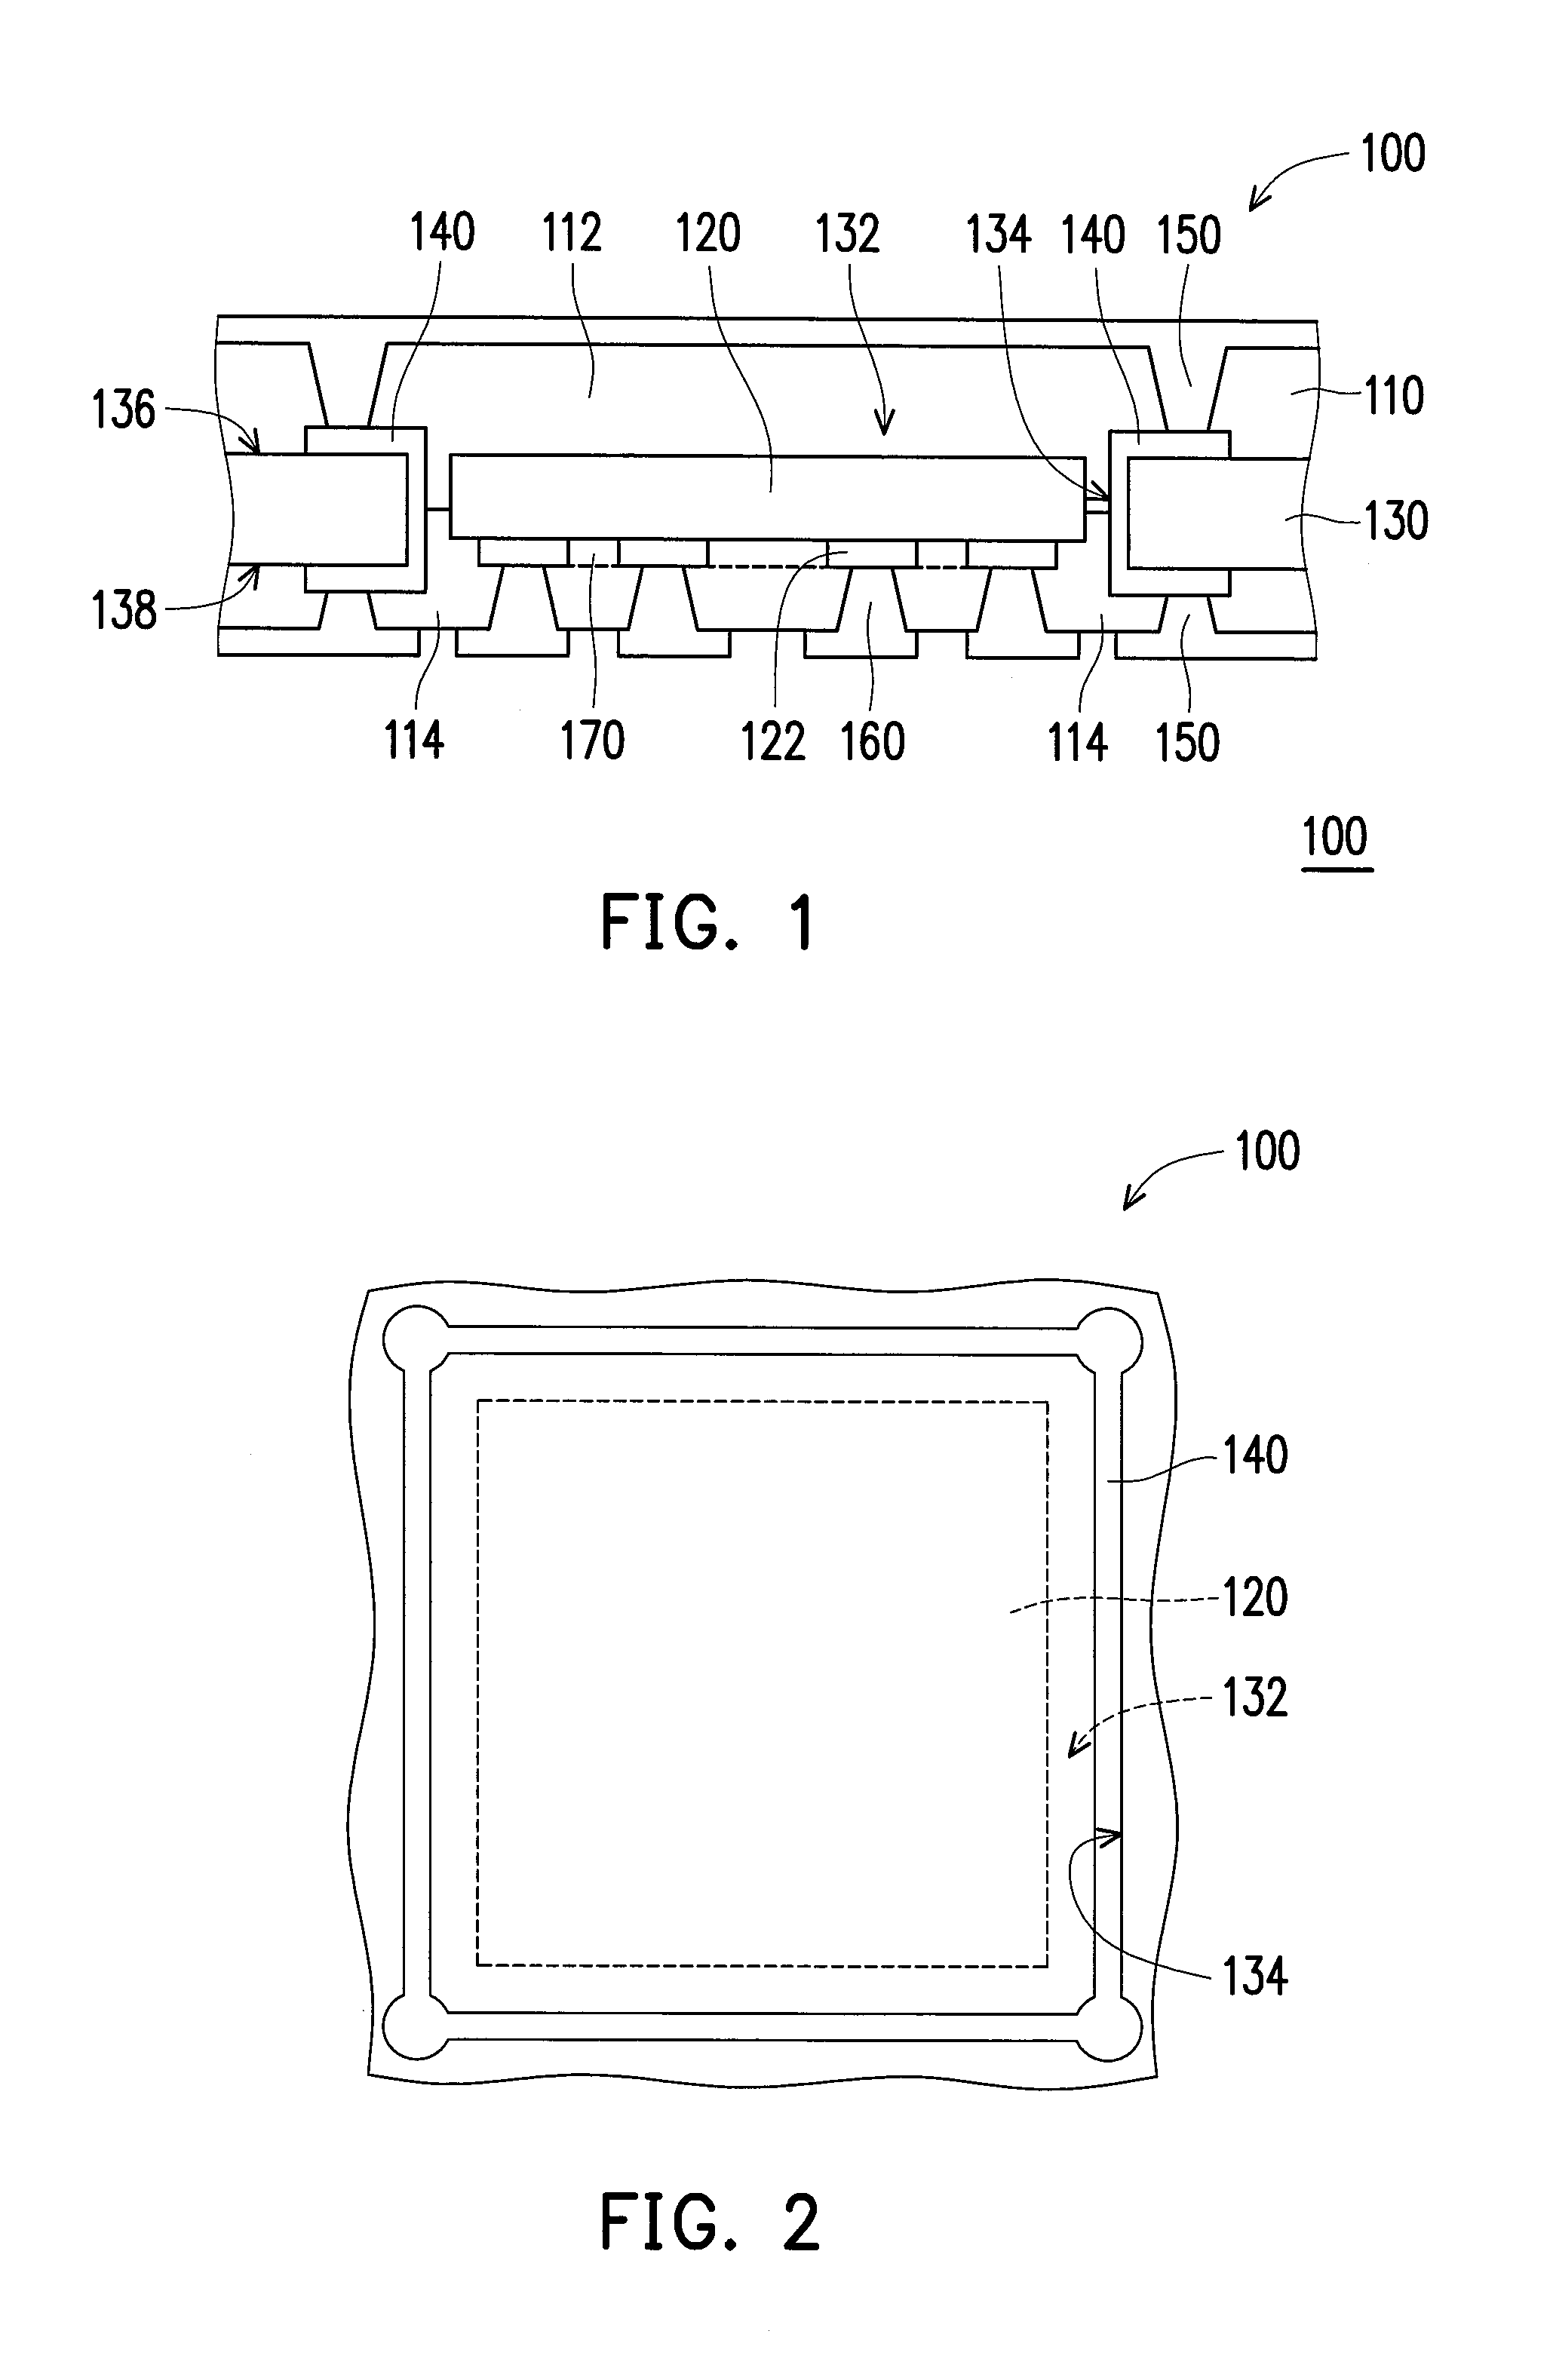 Embedded electronic device package structure